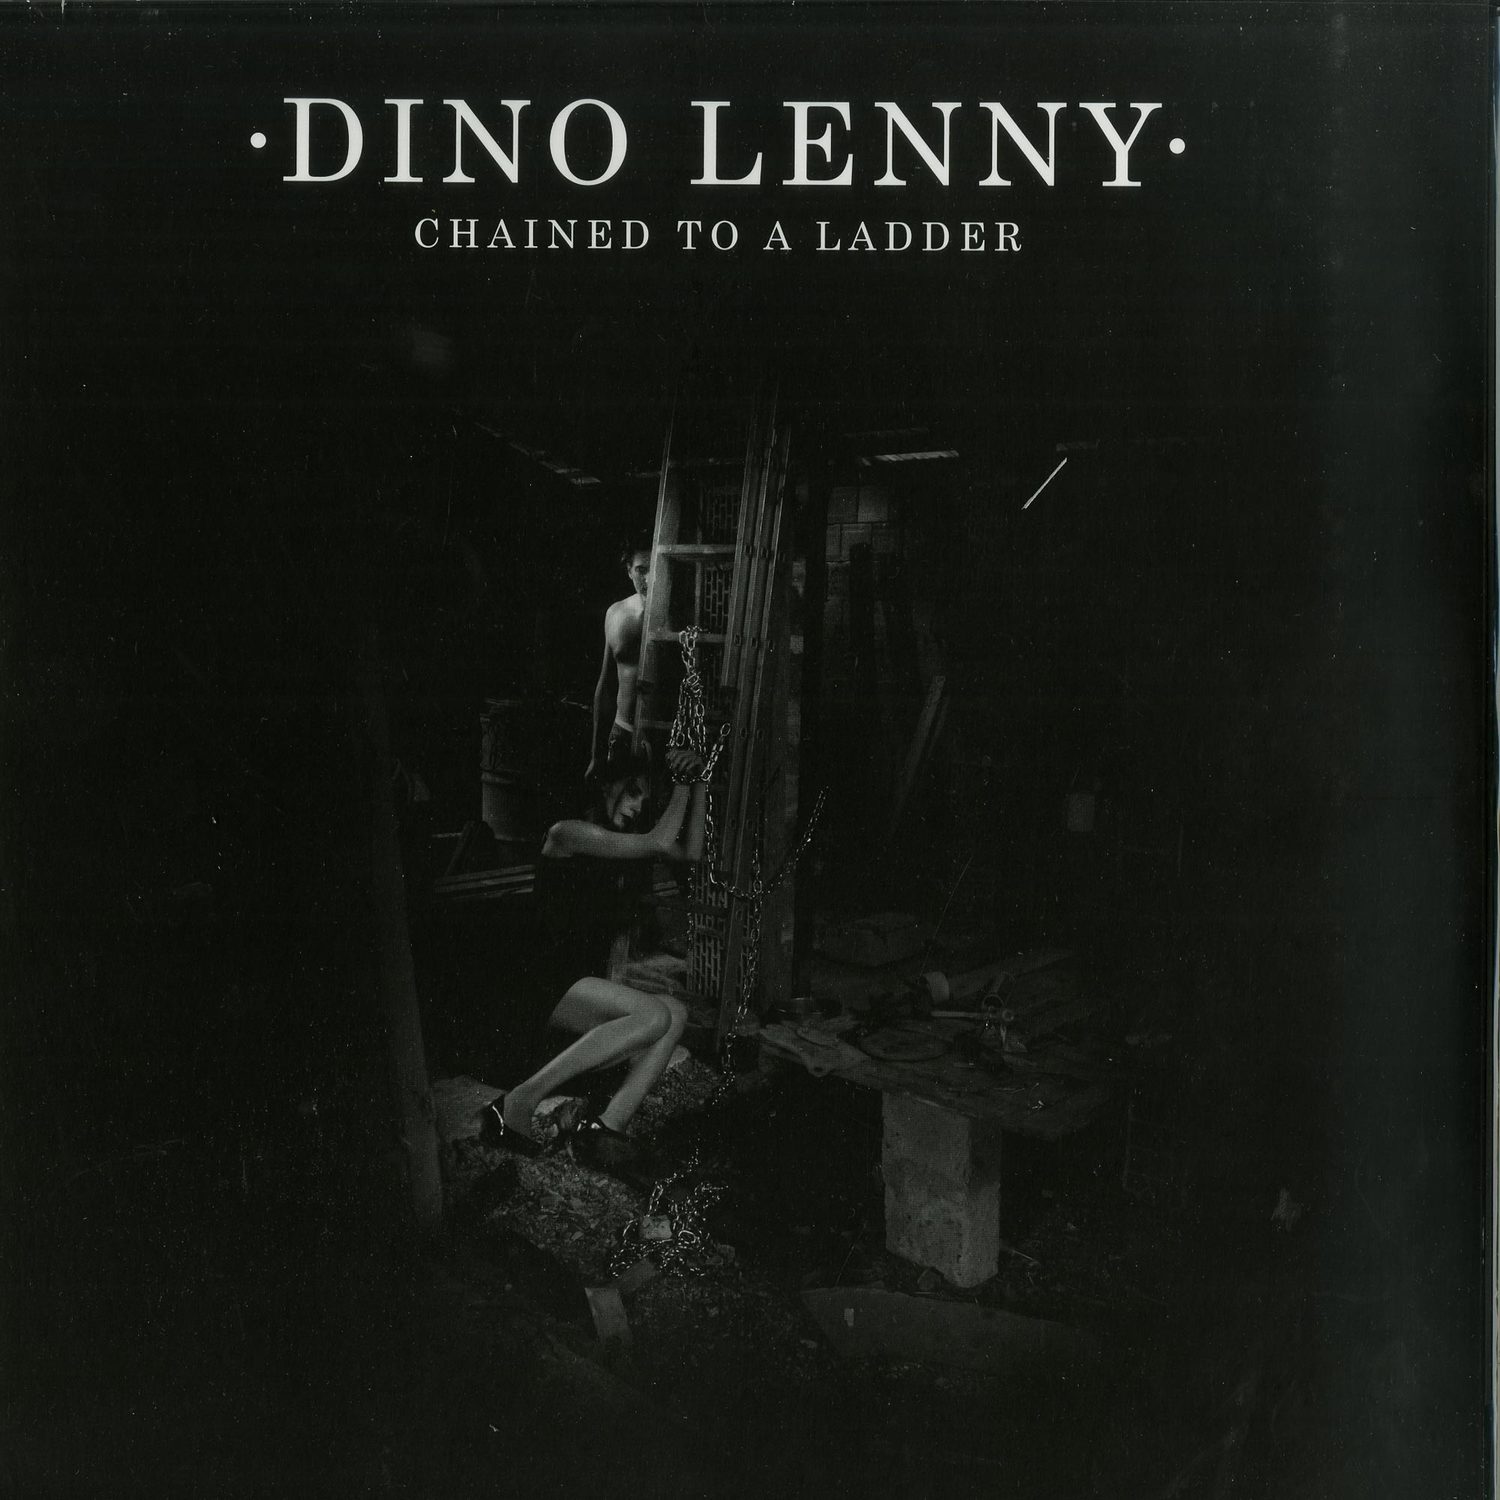 Dino Lenny - CHAINED TO A LADDER